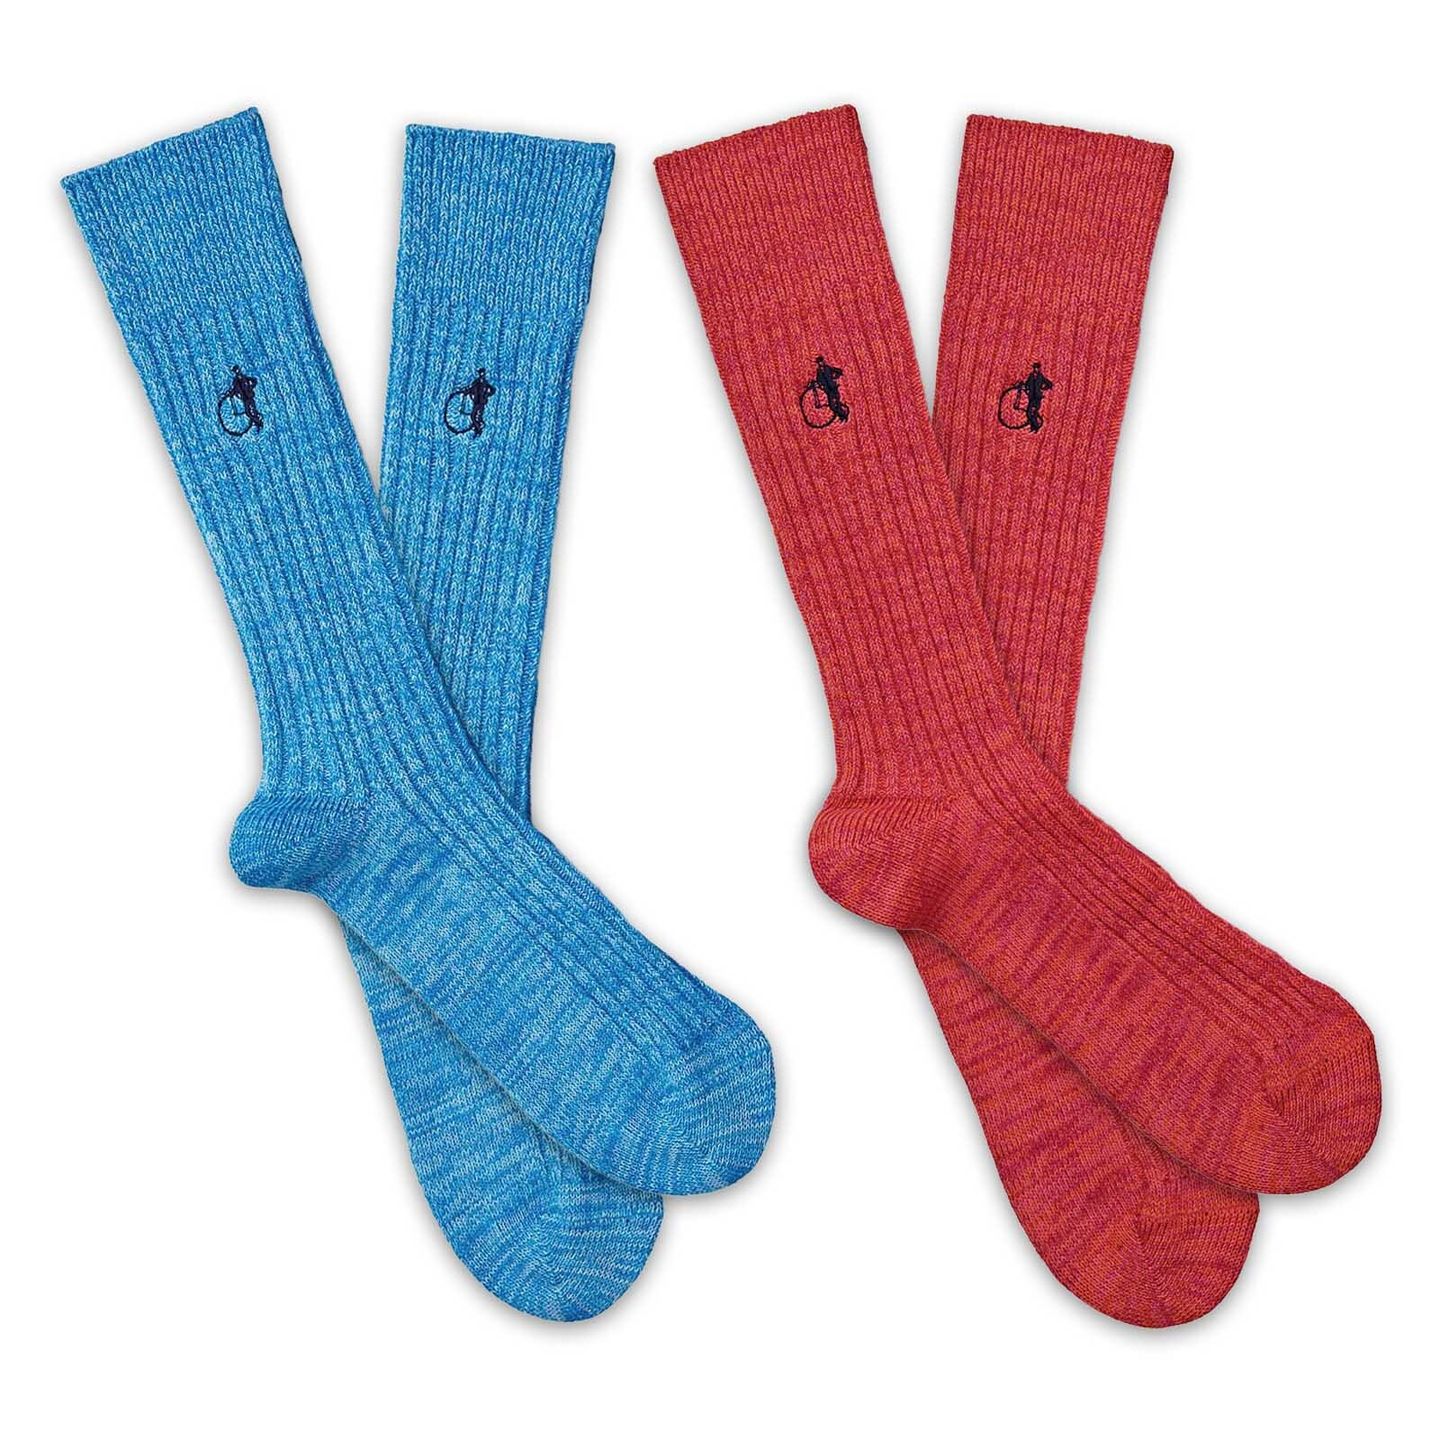 2 pair of mens socks in blue and red on a white background